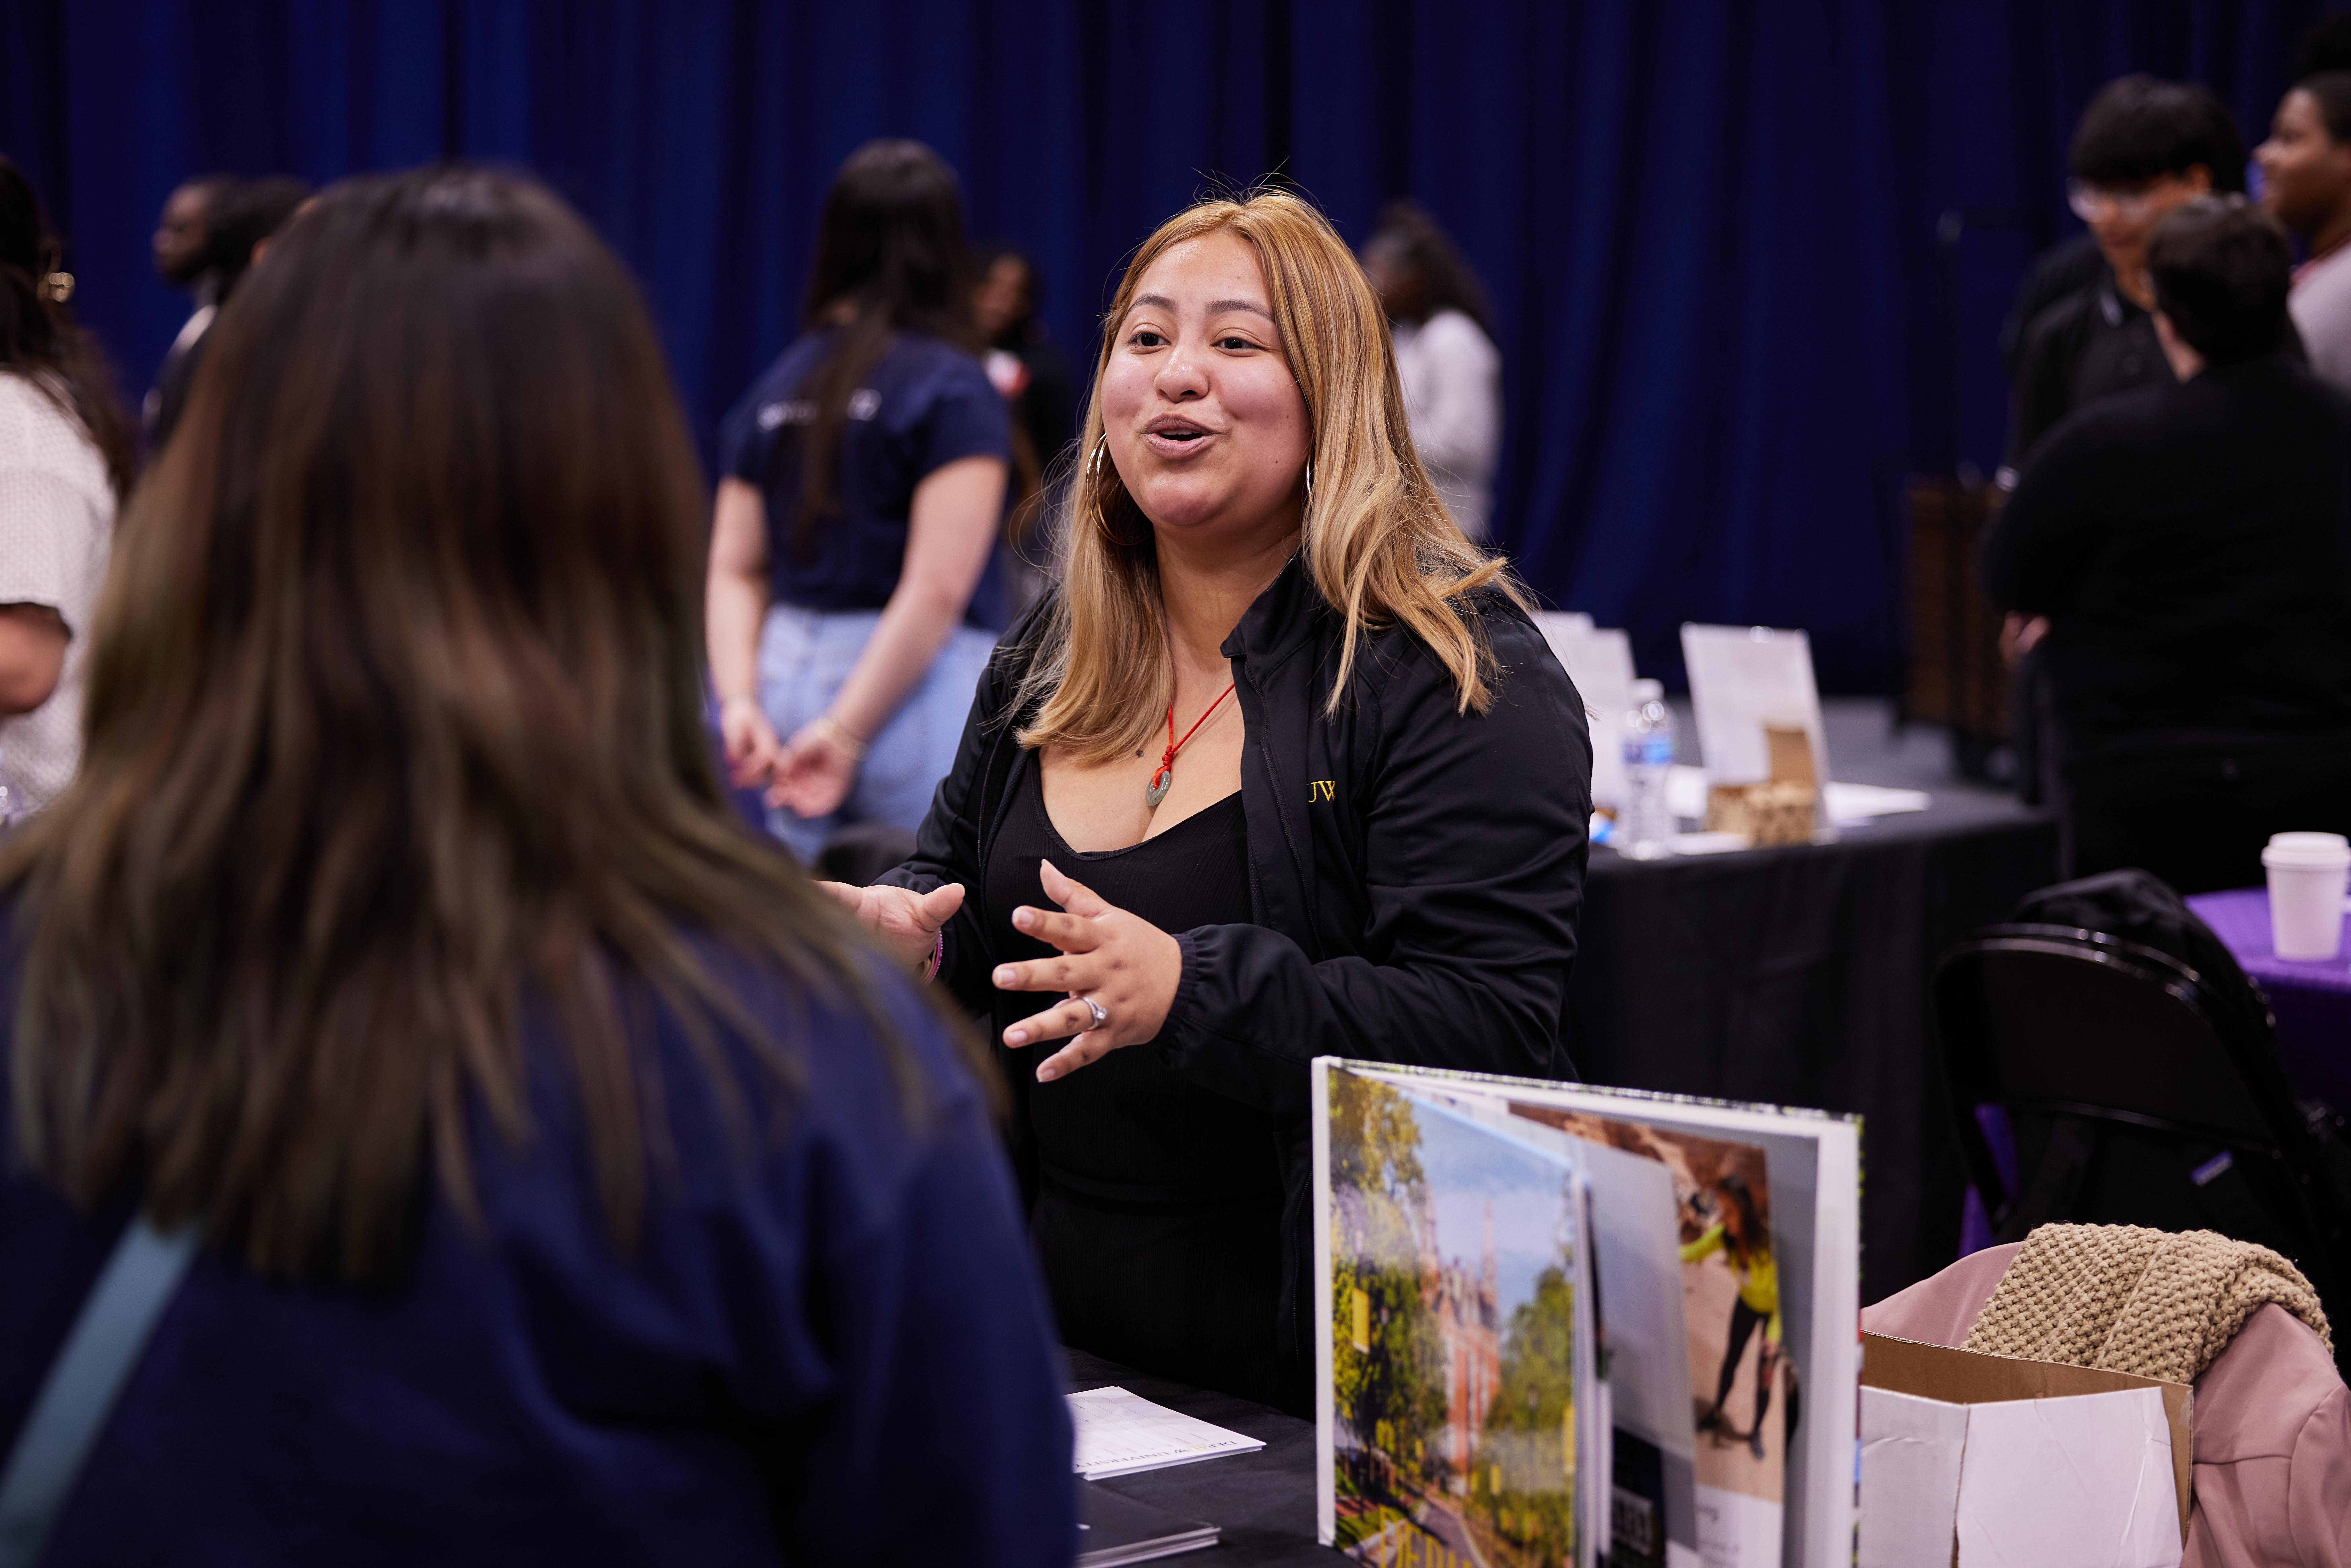 This photo shows Mari Santillan, a Pritzker College Prep alum, talking with current Noble Schools students at the annual junior college fair. She is now the assistant director of admission and diversity at DePauw University.